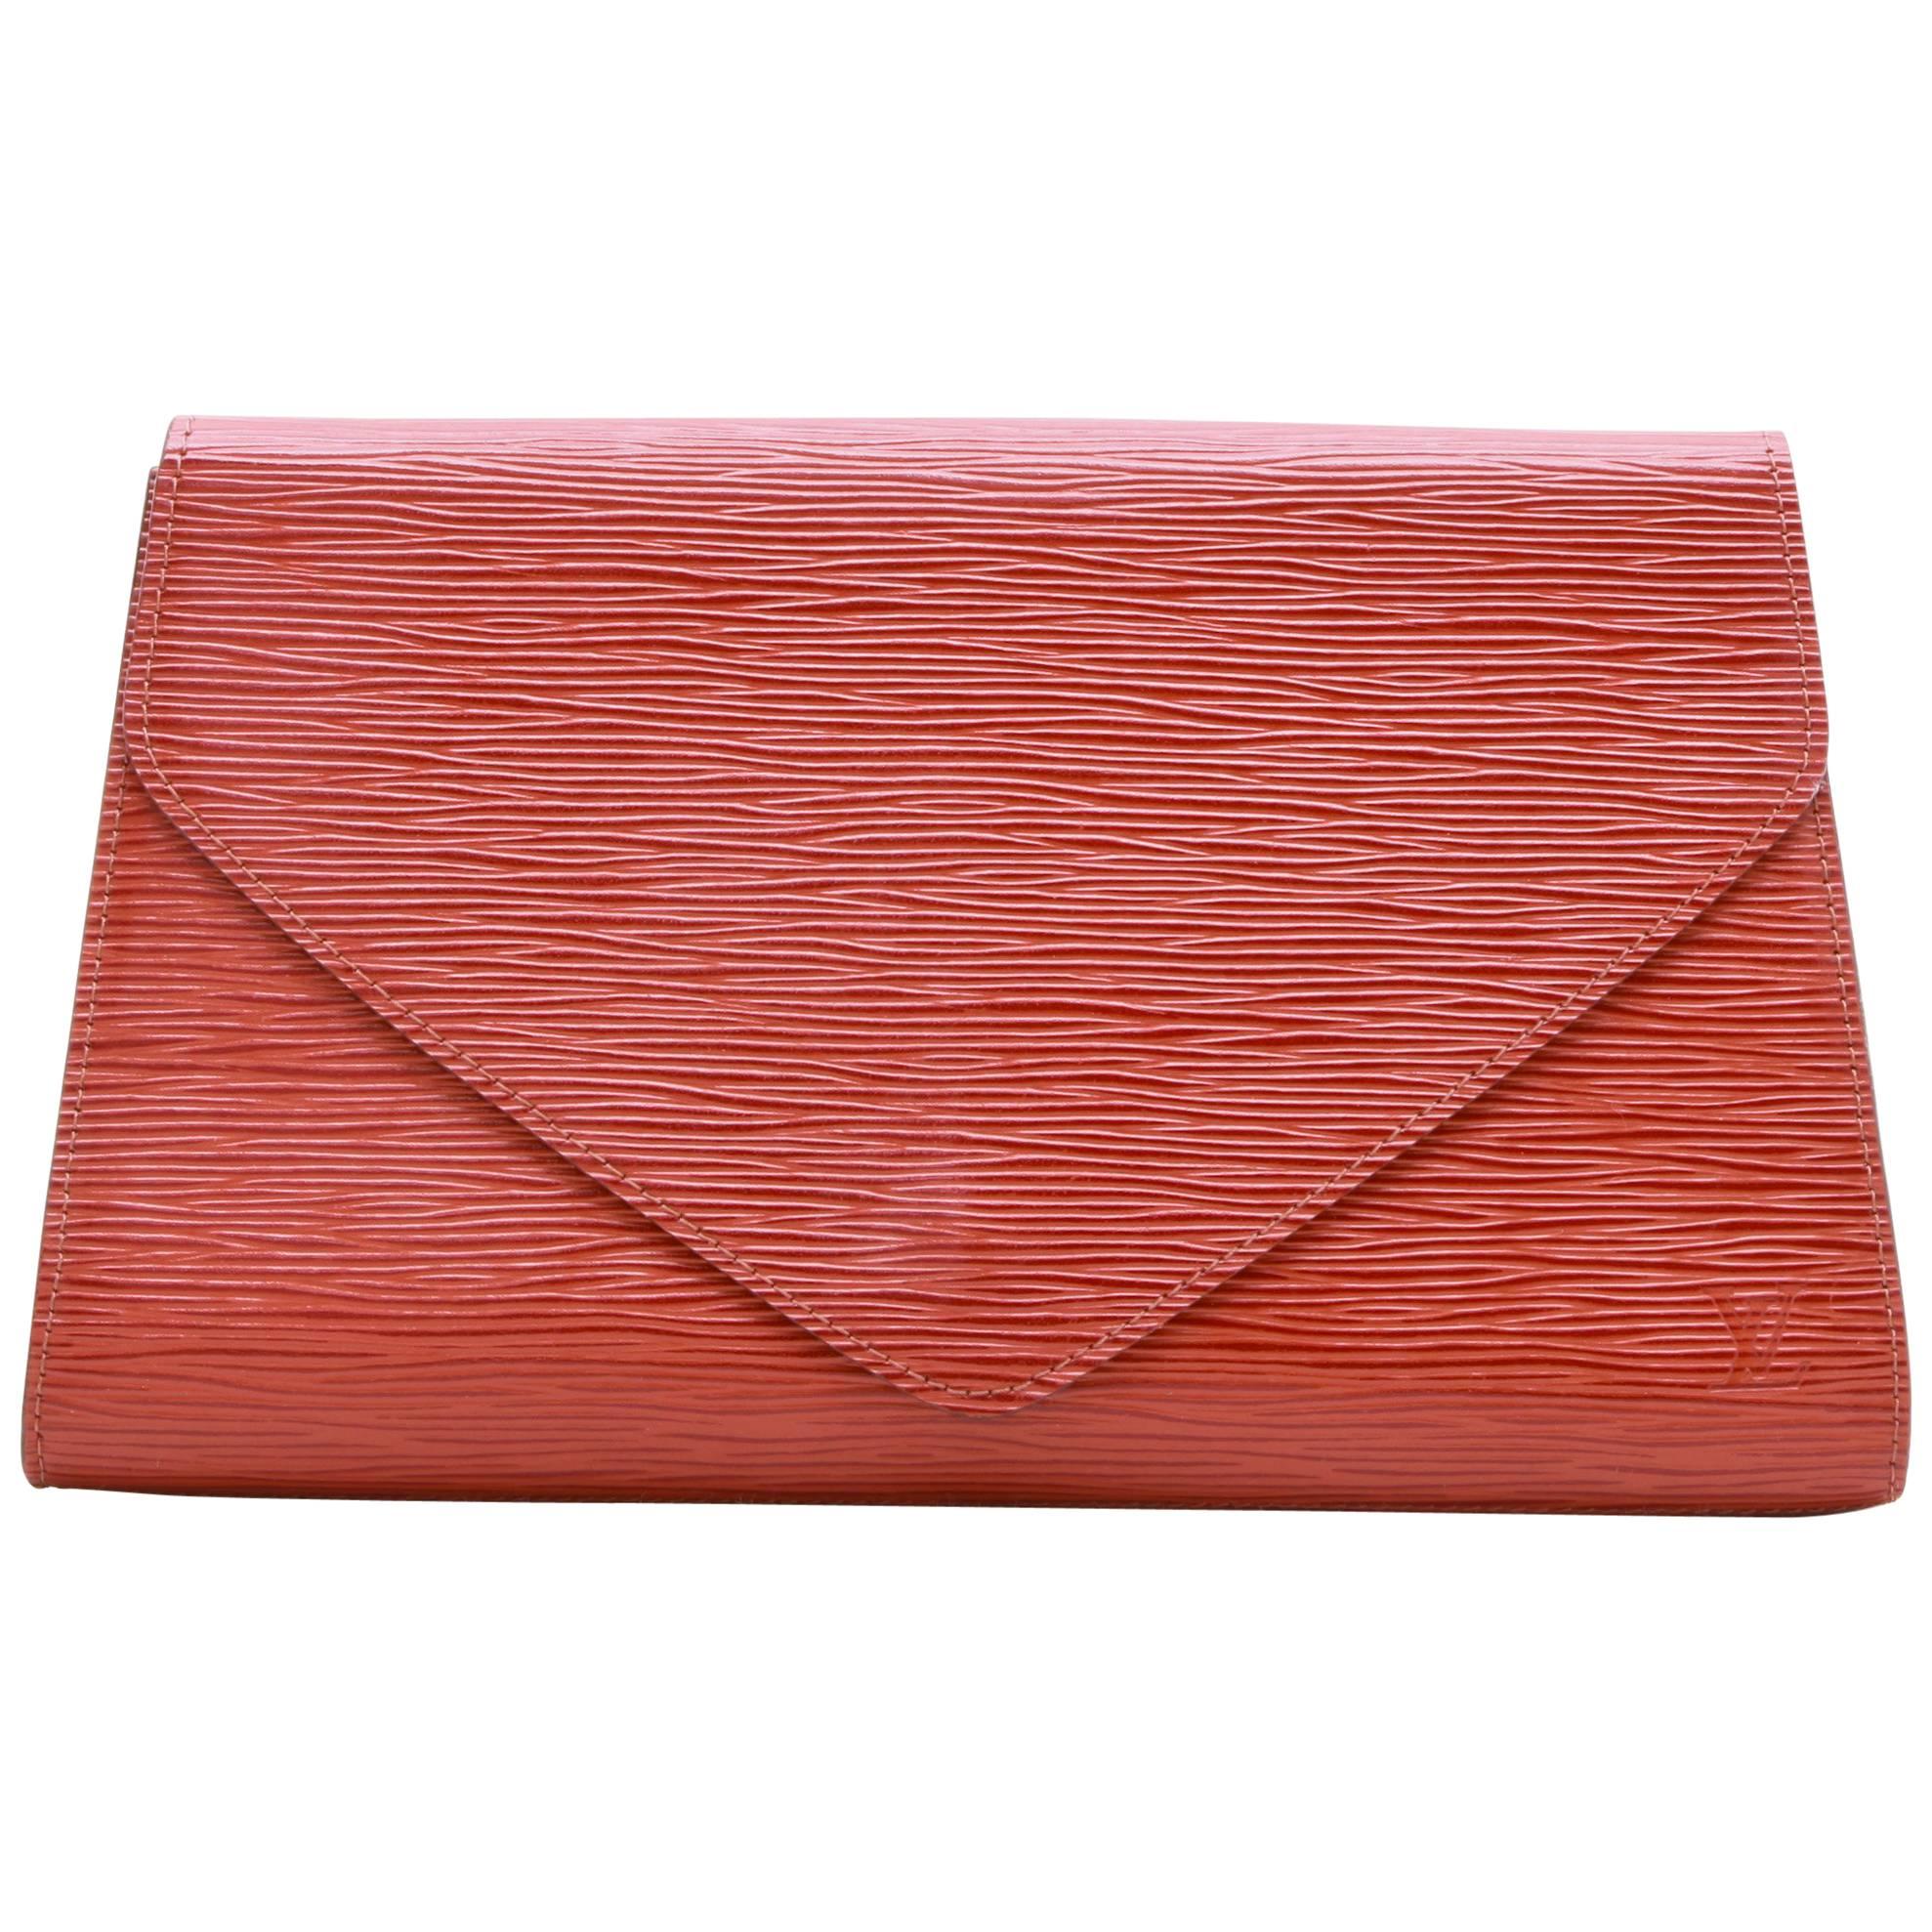 LOUIS VUITTON Vintage Clutch in Tawny Epi Leather